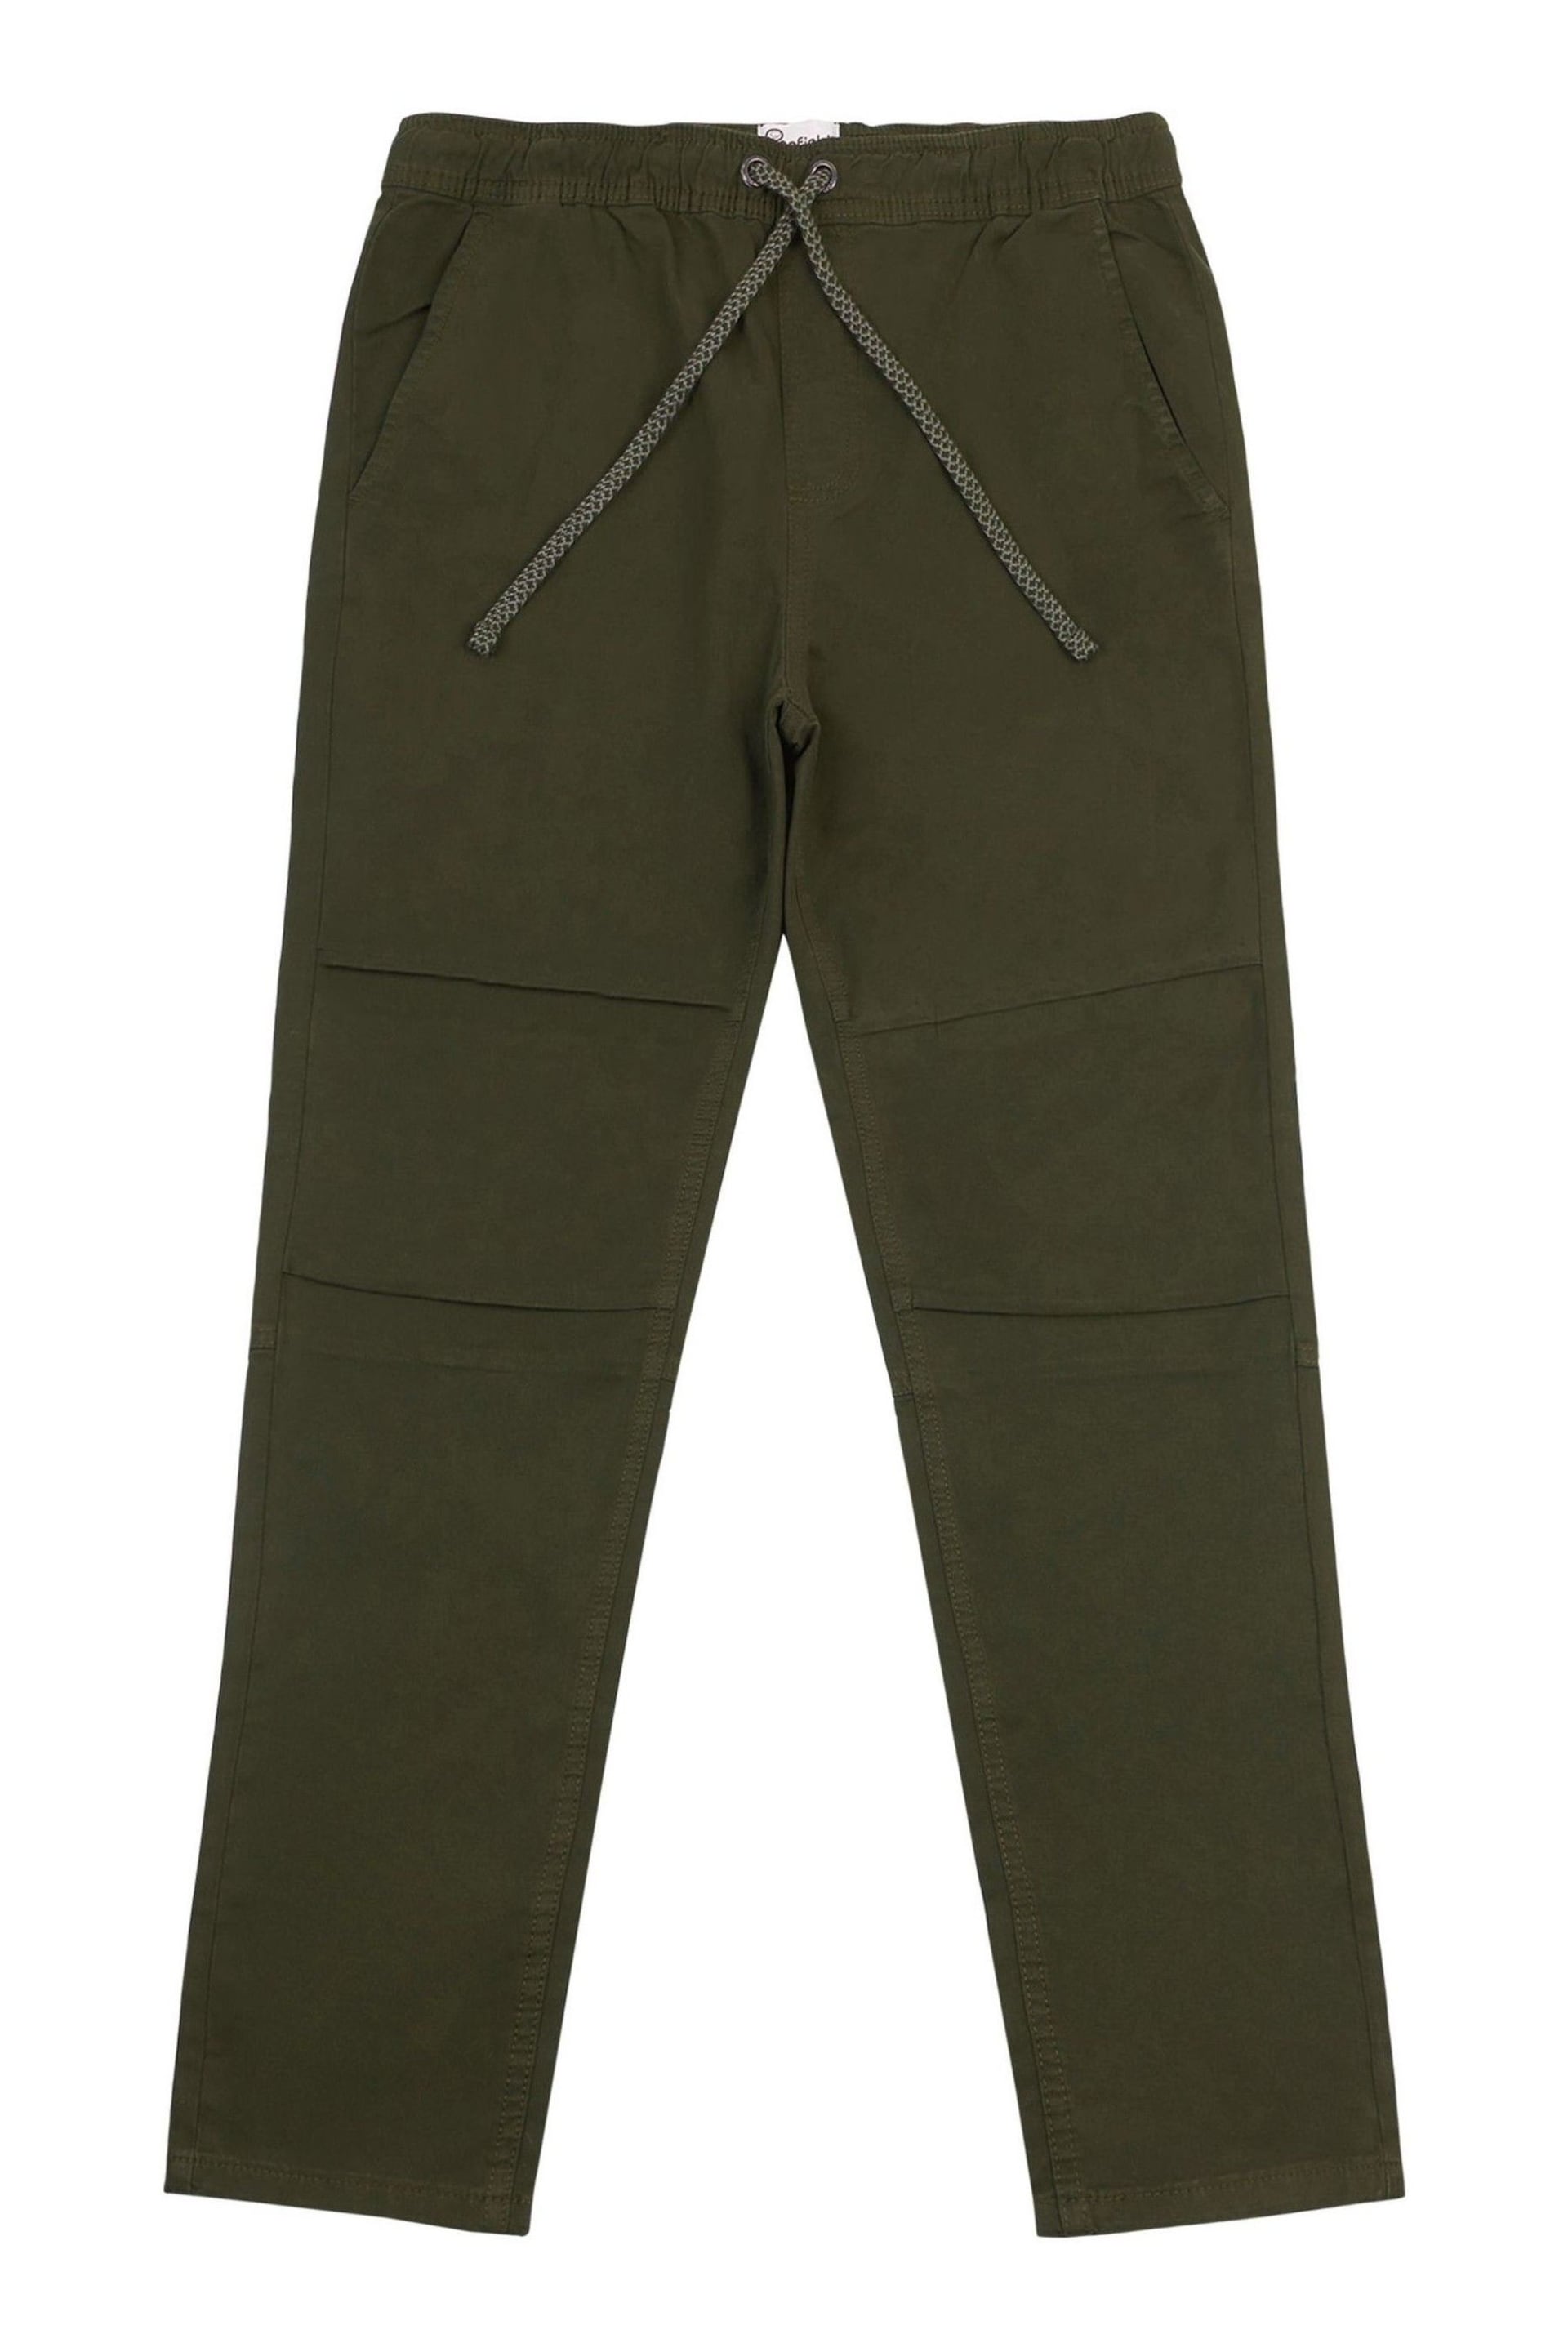 Penfield Green Hudson Script Elasticated Waist Trousers - Image 4 of 7